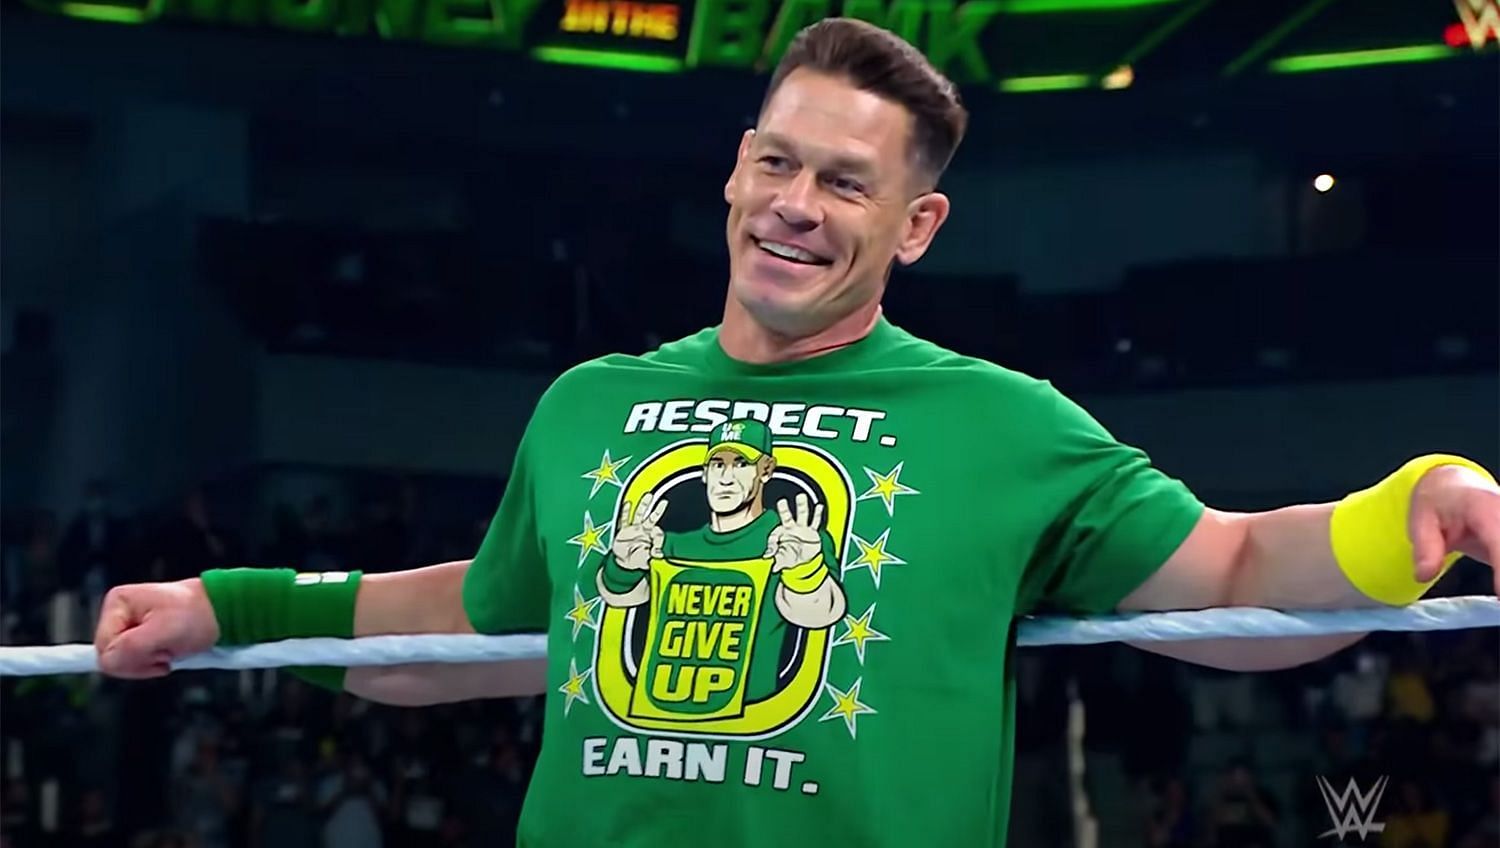 Cena has persisted with his principles for years